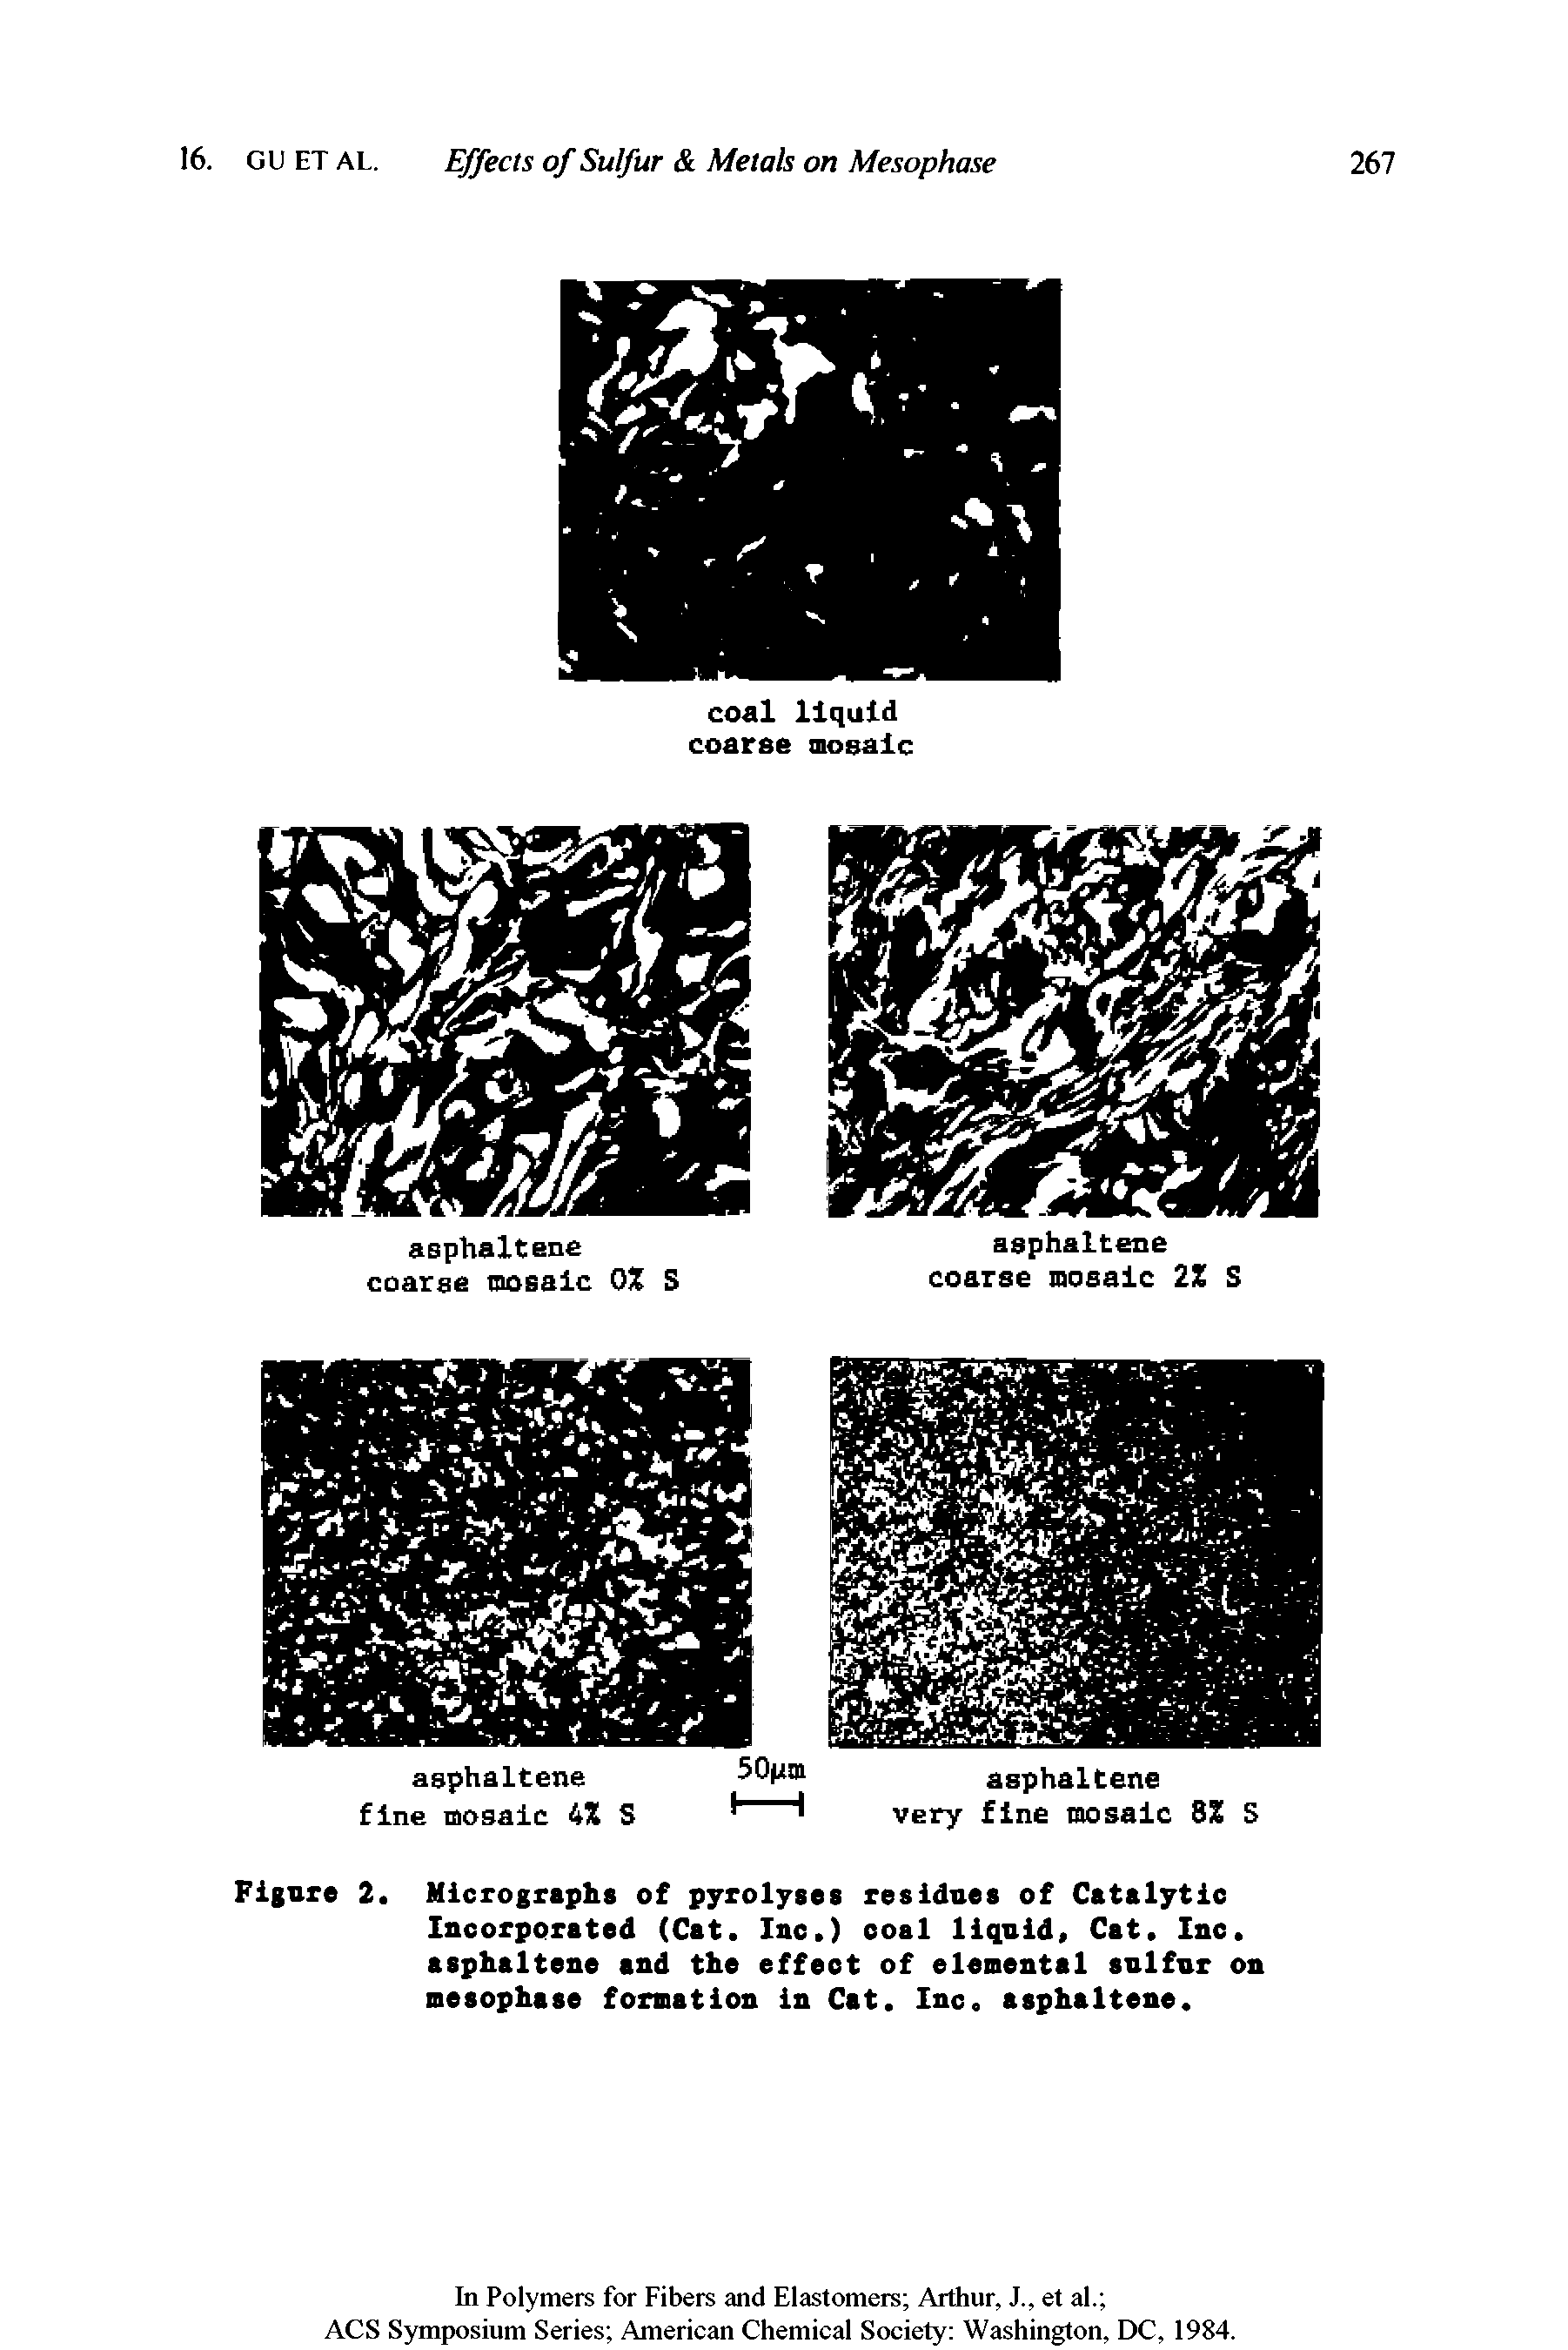 Figure 2. Micrographs of pyrolyiei residues of Catalytic Incorporated (Cat. Ino.) coal liquid. Cat, Ino. asphaltene and the effect of elemental sulfur on mesophase formation in Cat. Ino. asphaltene.